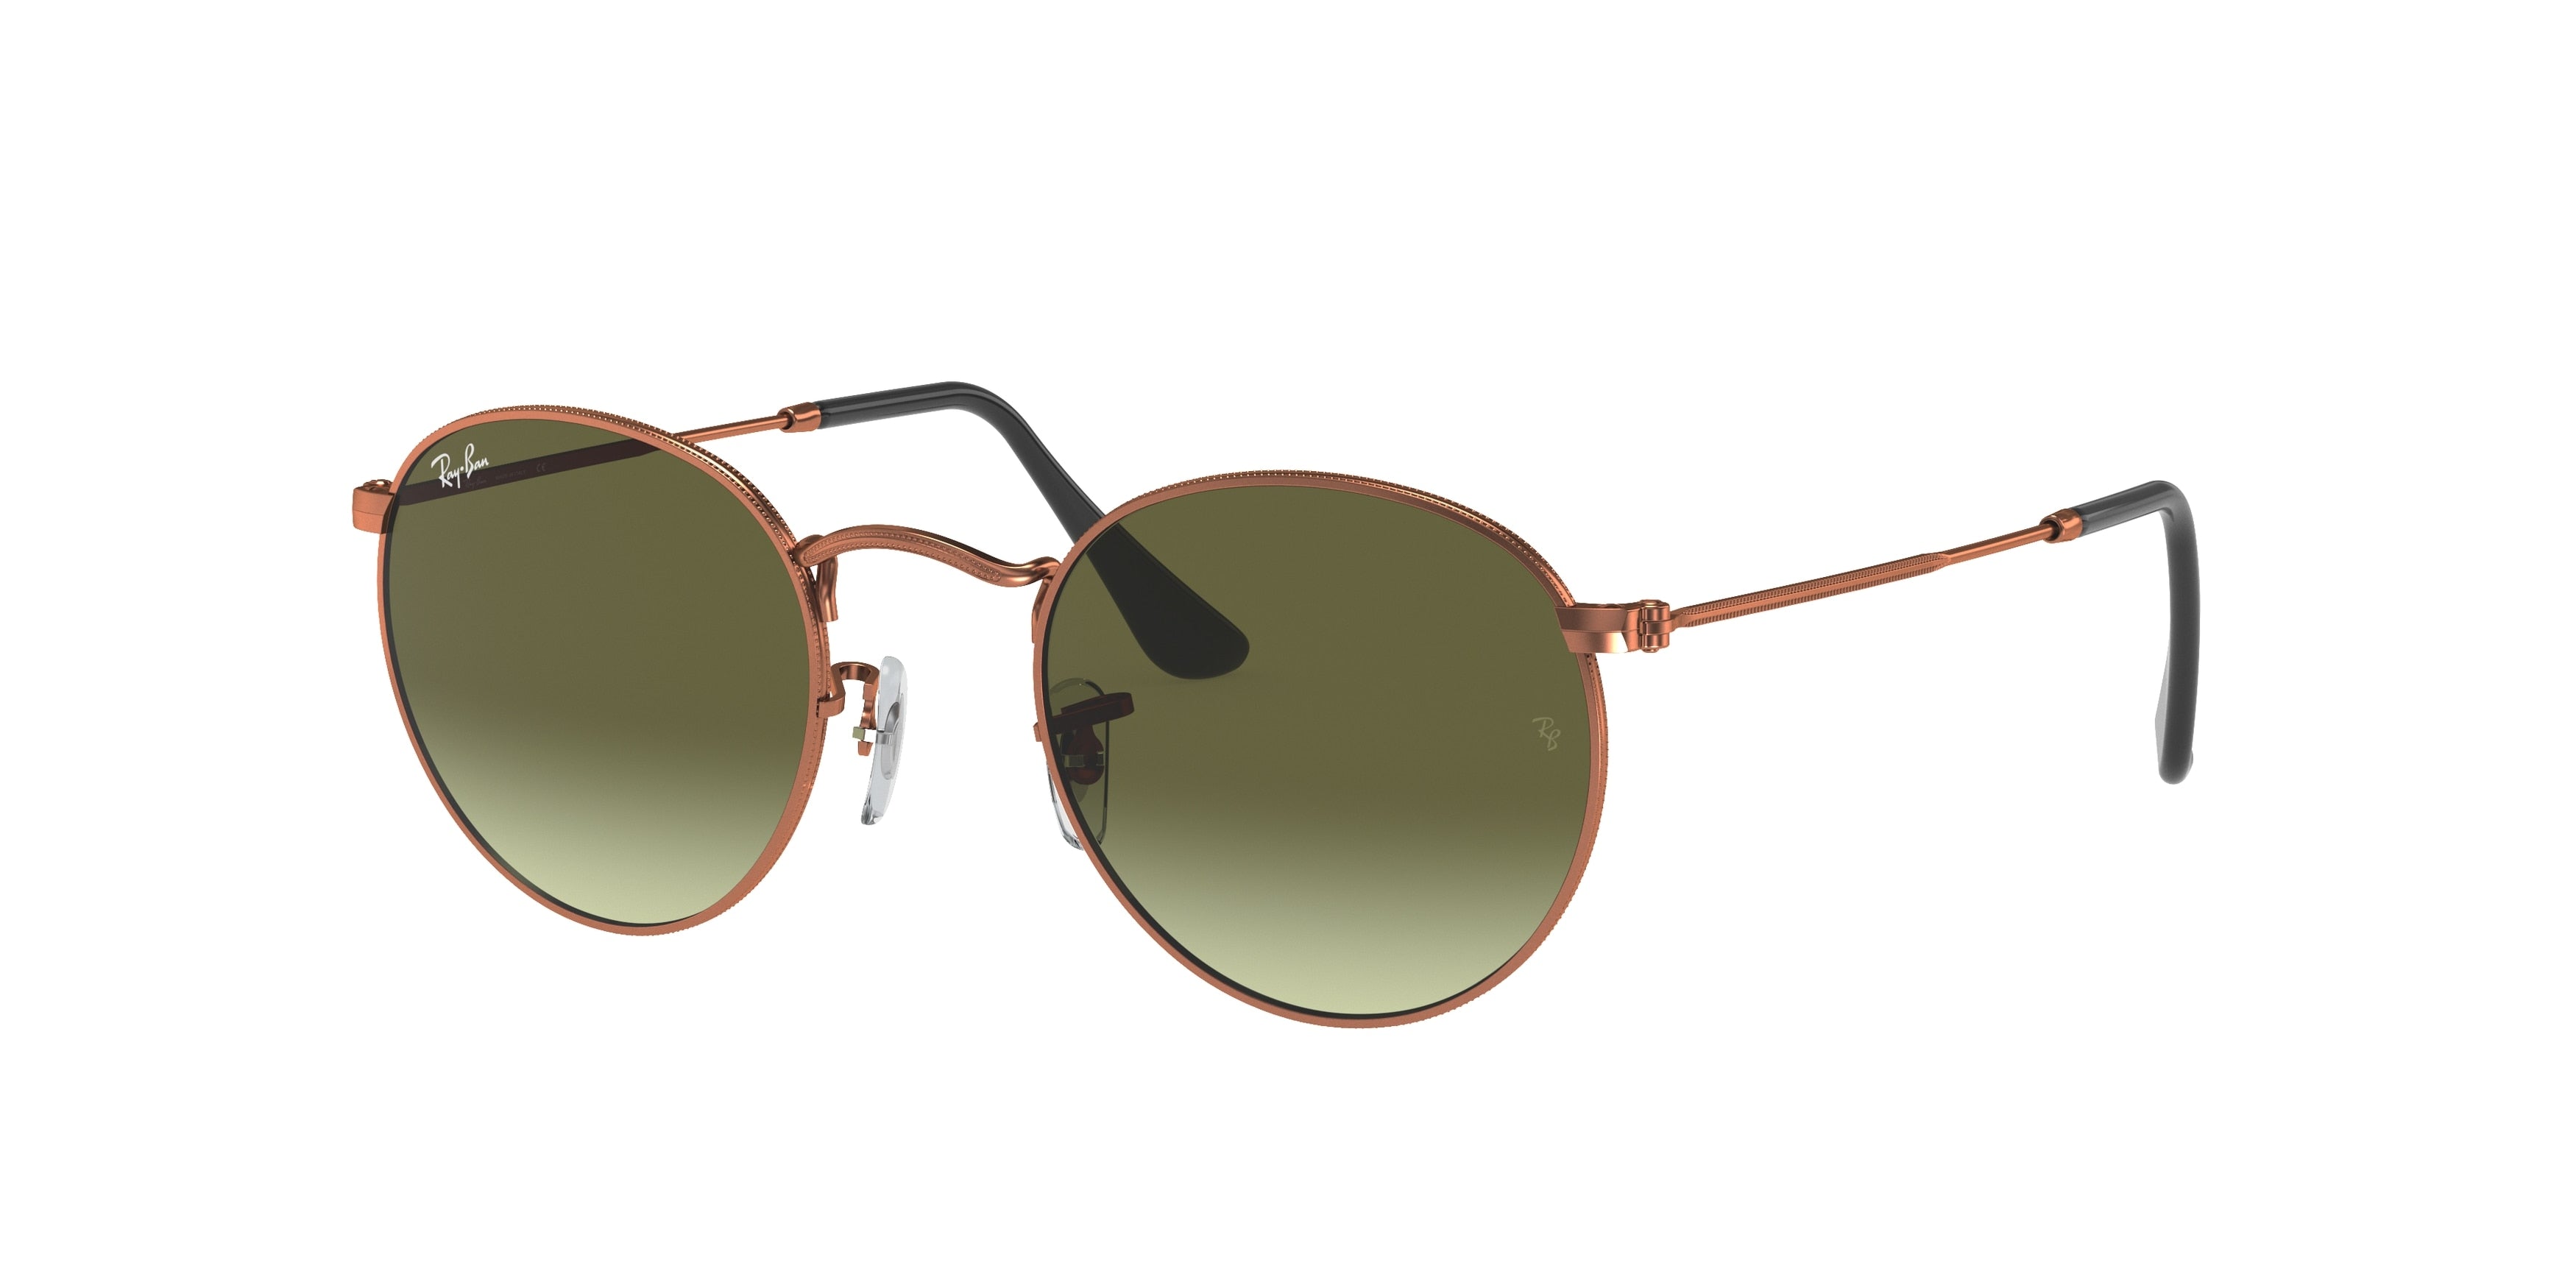 Ray-Ban ROUND METAL RB3447 Round Sunglasses  9002A6-Bronze-Copper 52-145-21 - Color Map Copper